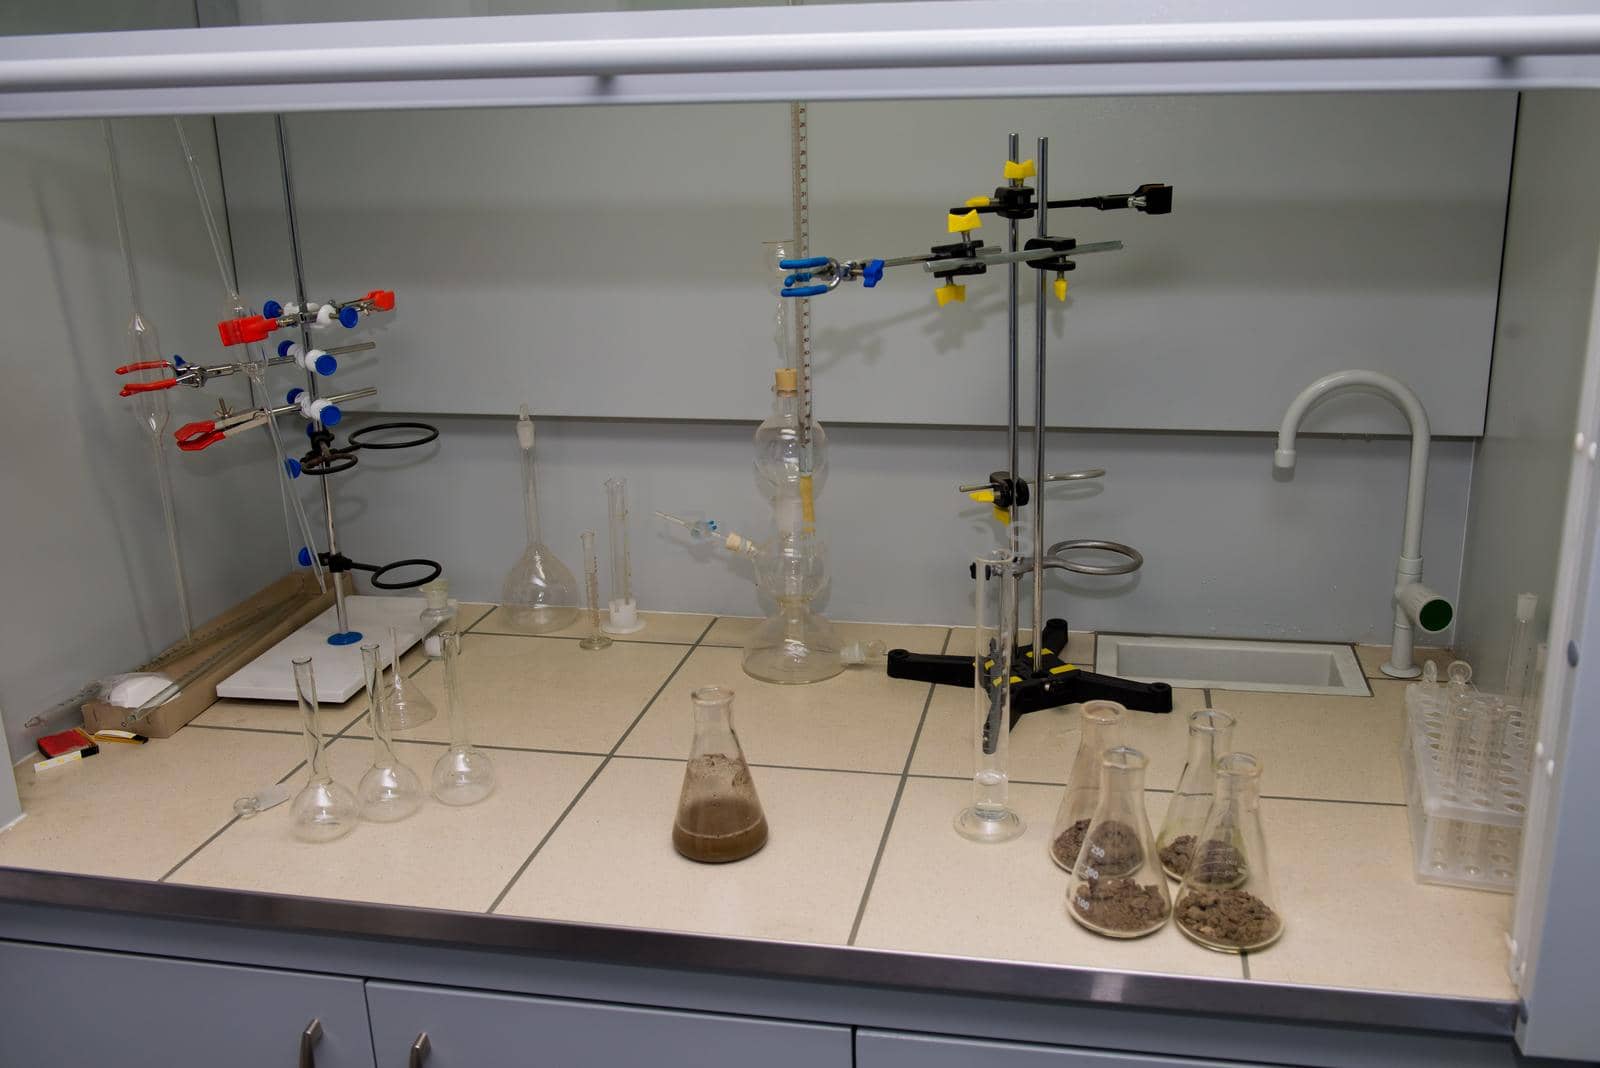 Equipment in a chemical laboratory.